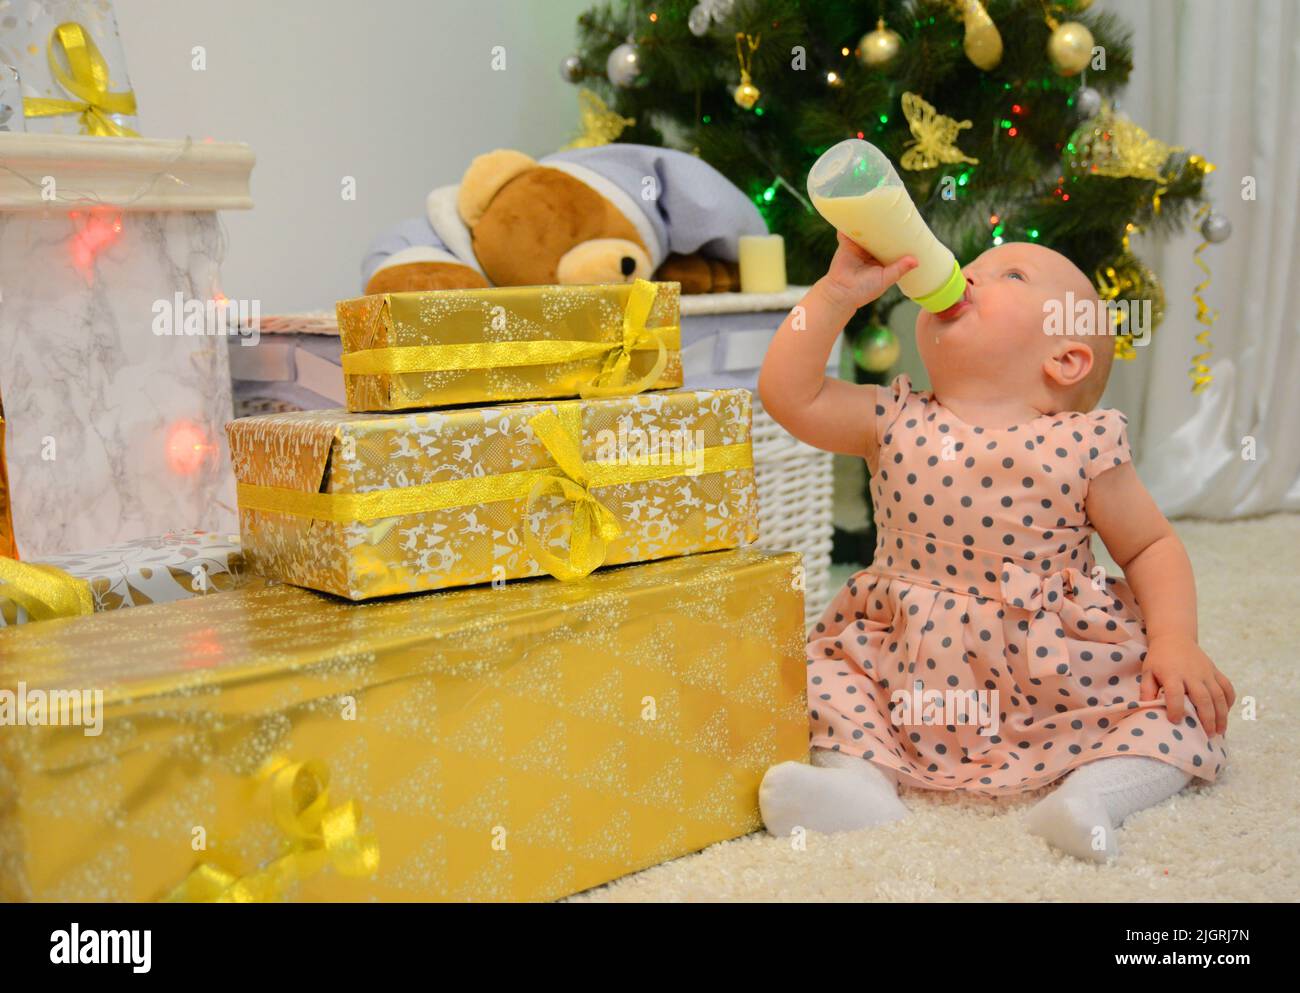 a small child A girl sits under a Christmas tree and drinks from a bottle with her head tilted up, there are golden boxes with gifts next to her and a basket with a bear's head is visible Stock Photo